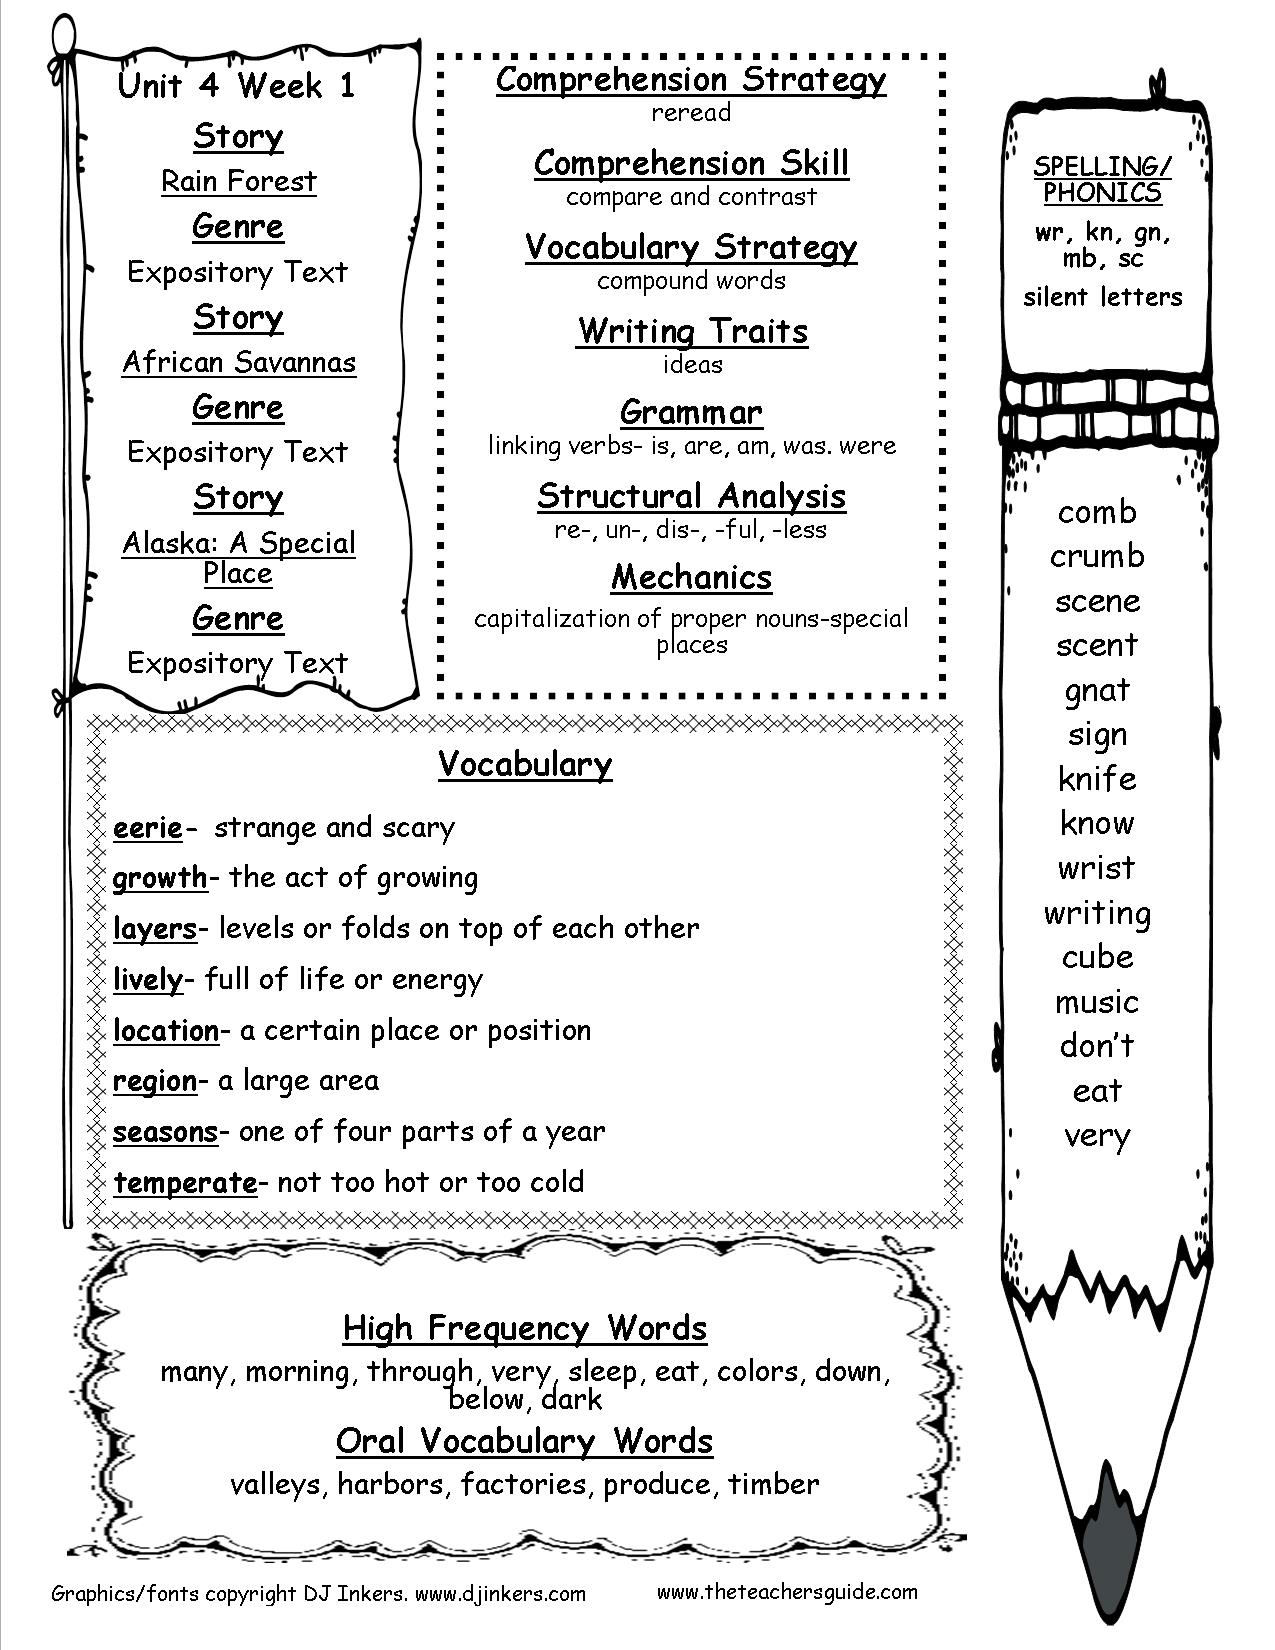 17 Best Images of Teaching Guide Words Worksheets Place